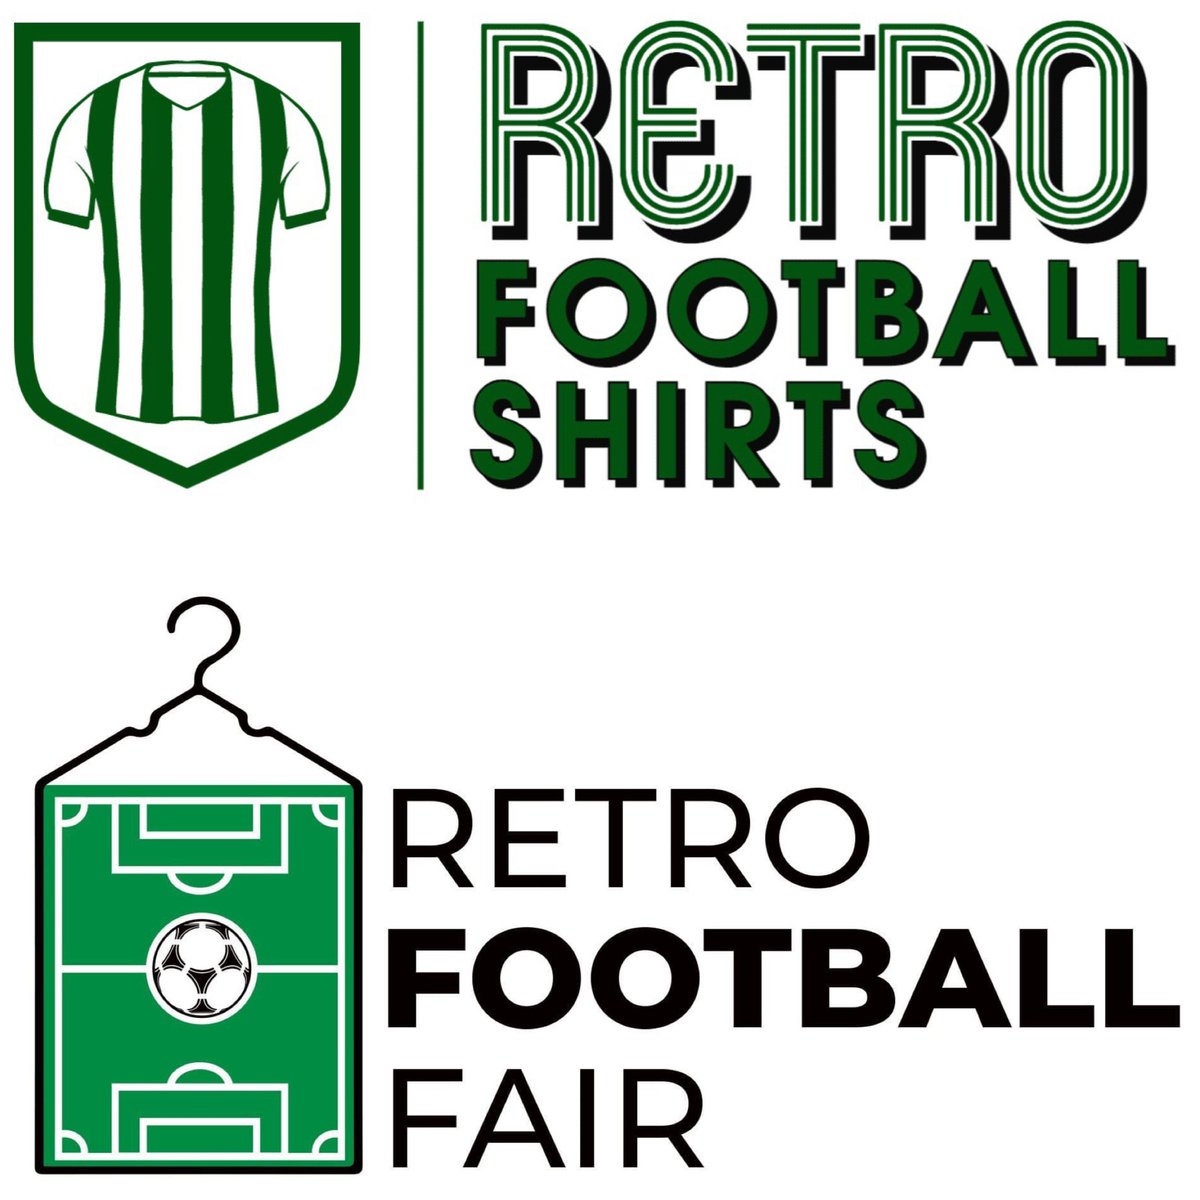 2 weeks until the next Retro Football Fair, where we will be returning to Trafalgar Warehouse, Sheffield, S1 4JT. Doors open at 1000hrs for early bird ticket holders Get your tickets here ⤵️ retrofootballfair.com #retrofootballshirts #retrofootballfair #rfs #rff